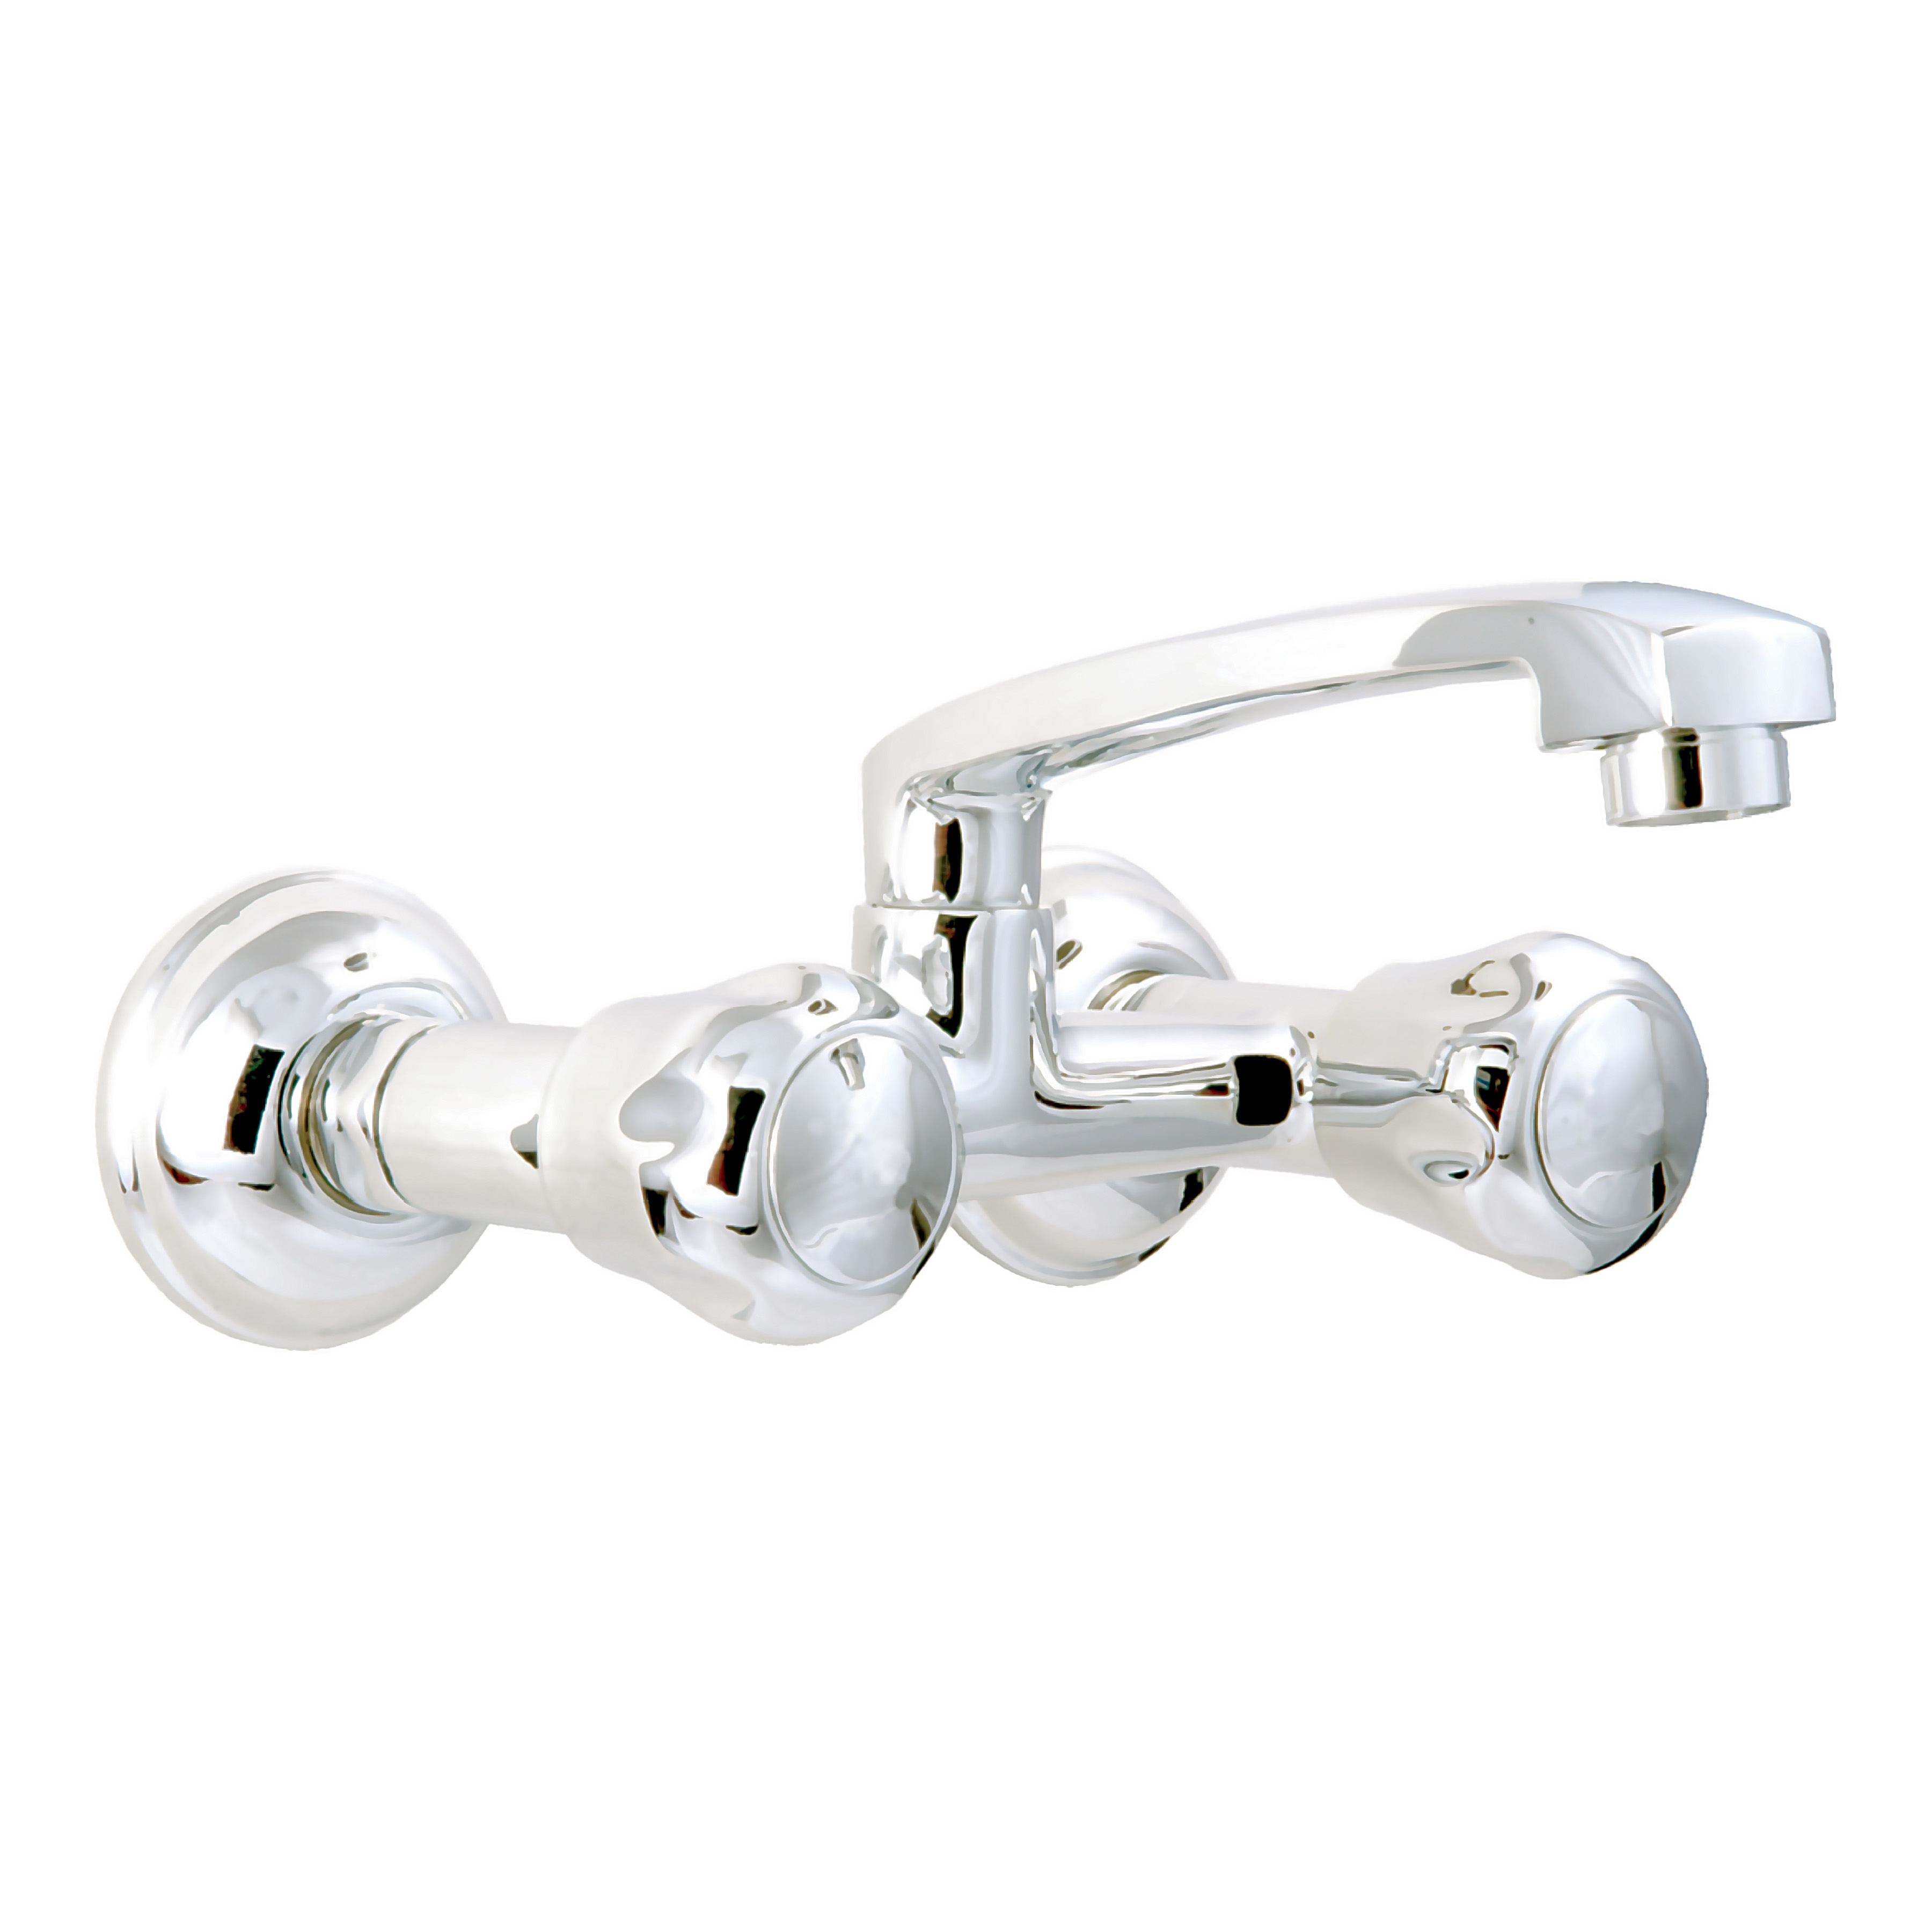 Falco Sink Mixer With Swivel Spout